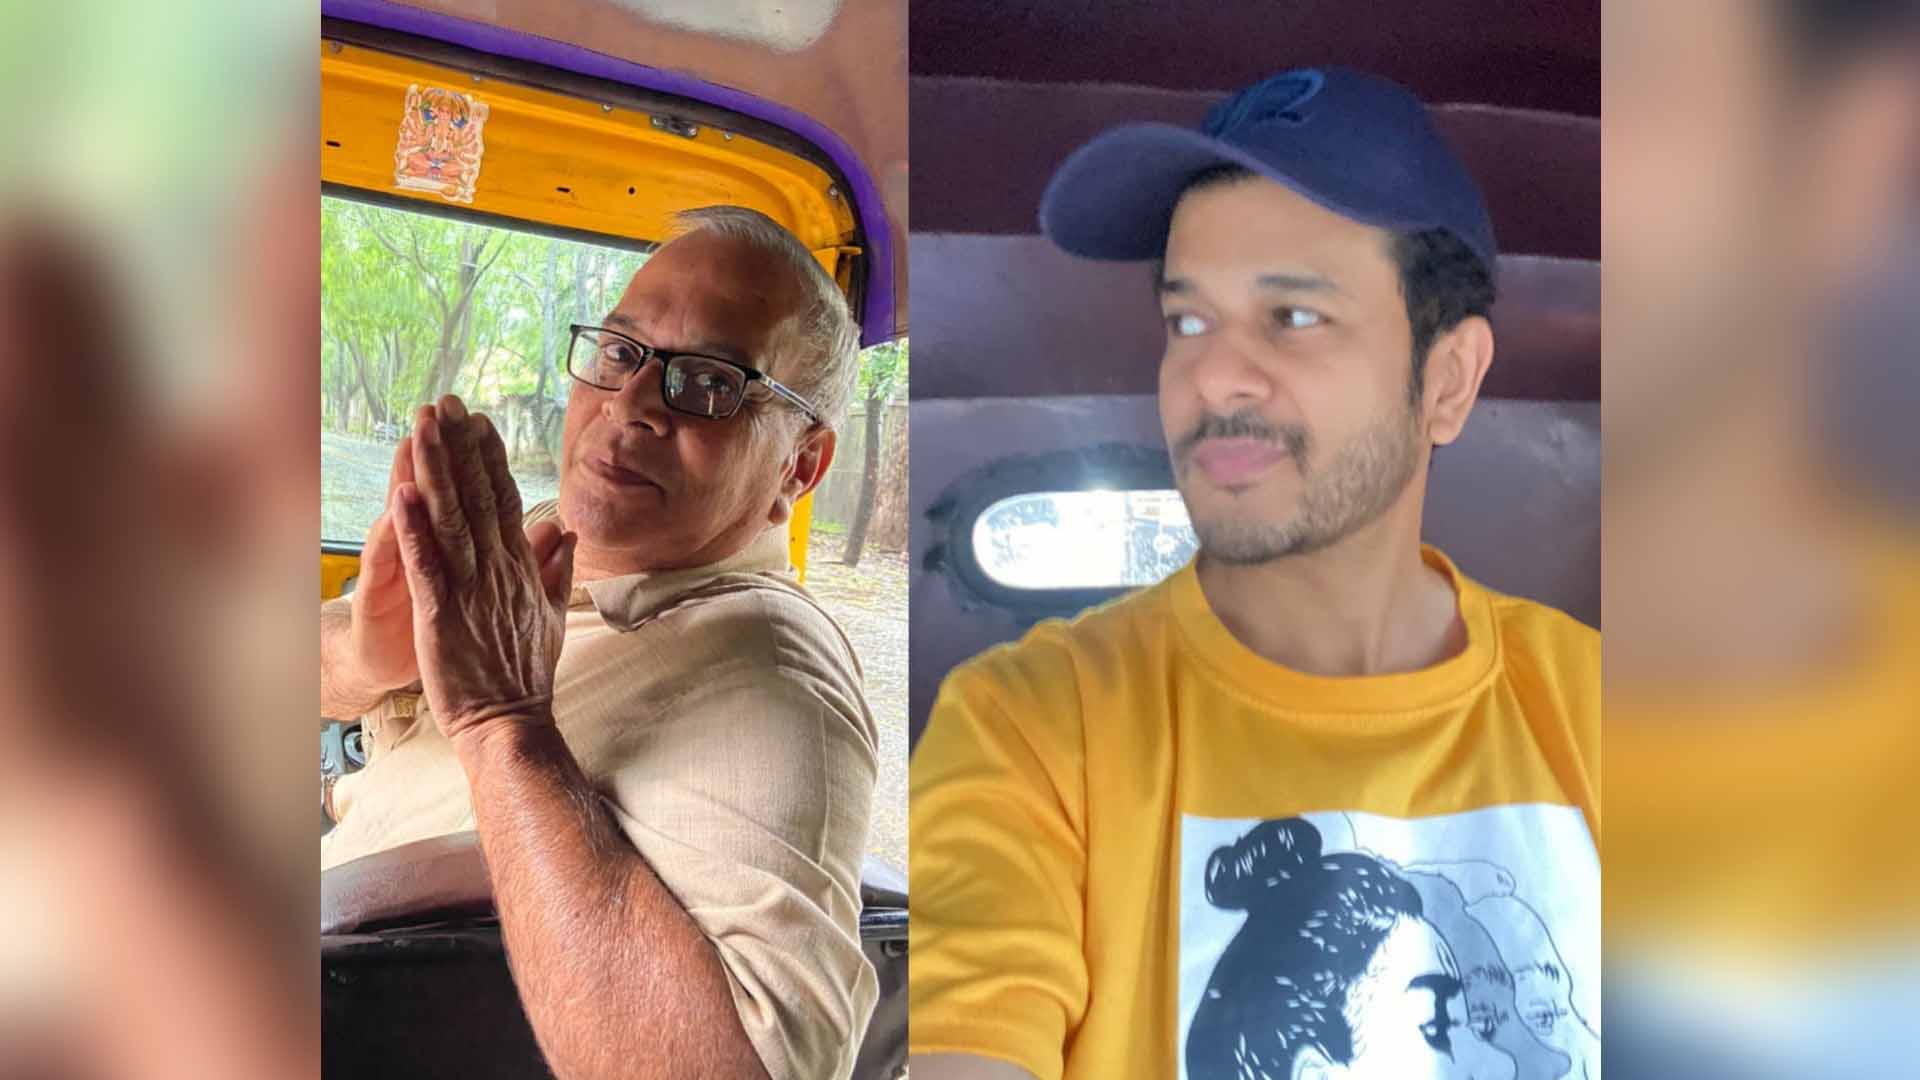 Jay Soni encourages people to embrace compassion in their daily lives, does the same through a heartfelt encounter with the auto driver